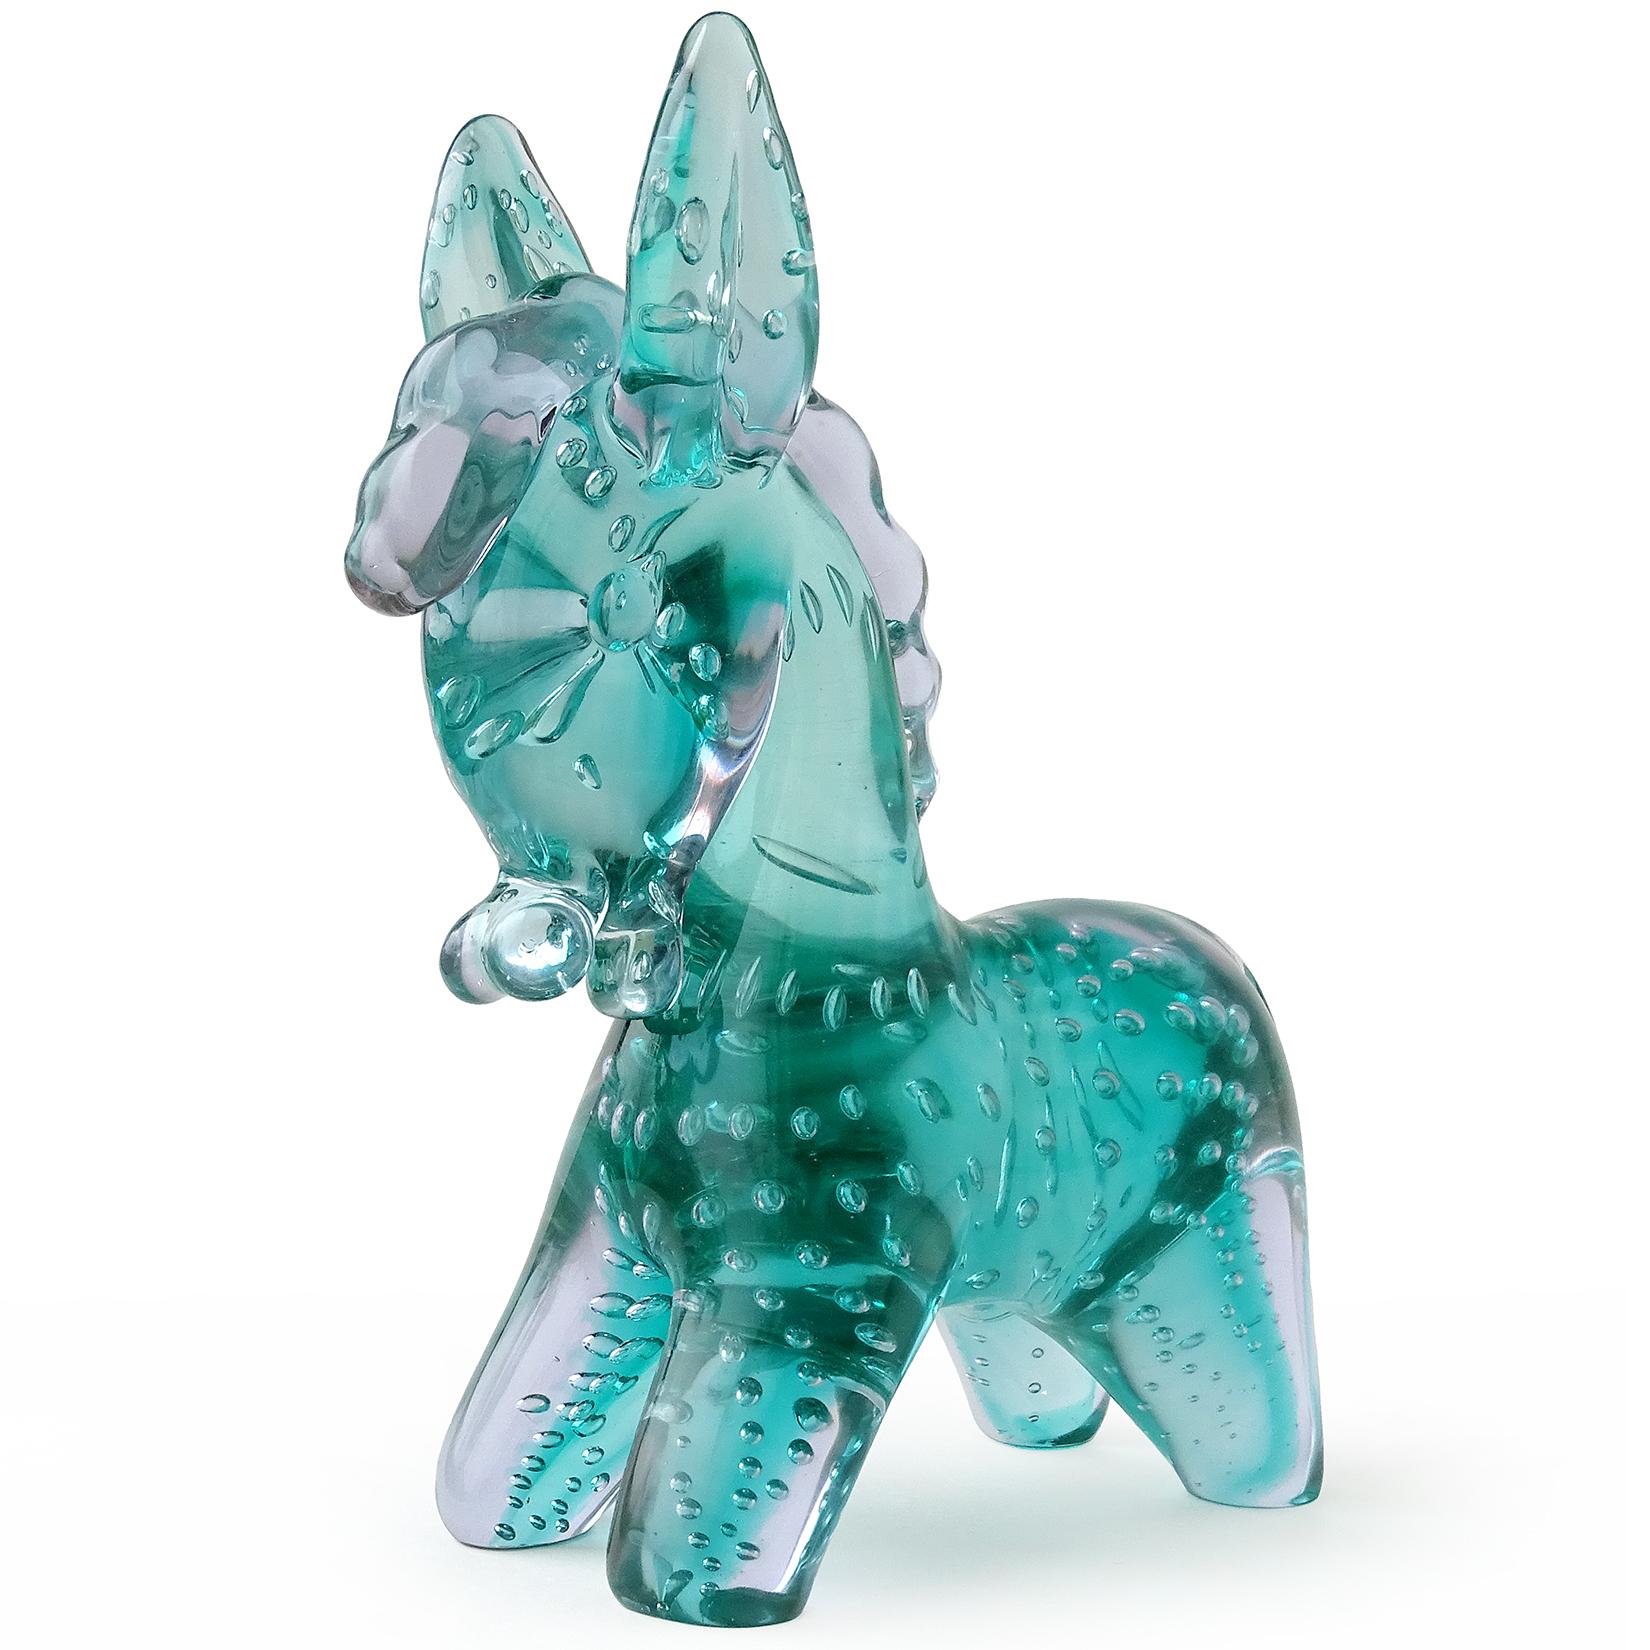 Beautiful older Murano hand blown Sommerso green with controlled bubbles Italian art glass donkey sculpture. Attributed to the Seguso Vetri d'Arte company. Created in the 